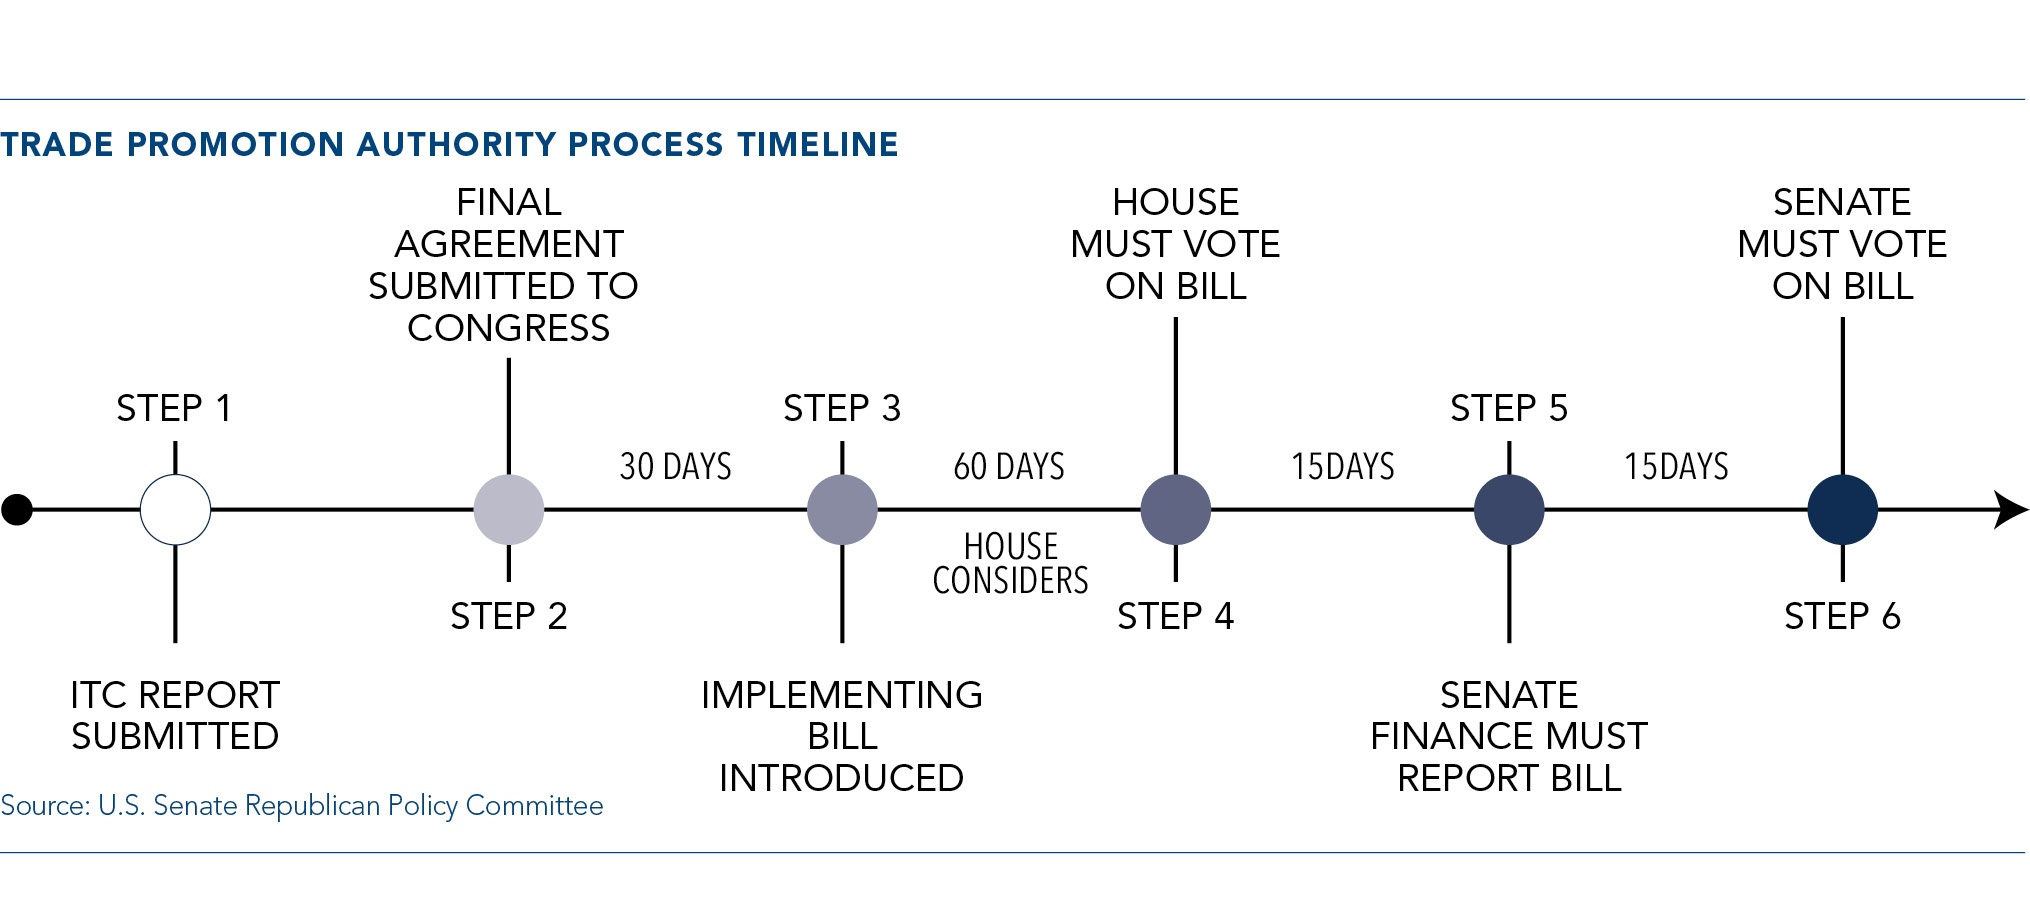 Trade Promotion Authority Process Timeline